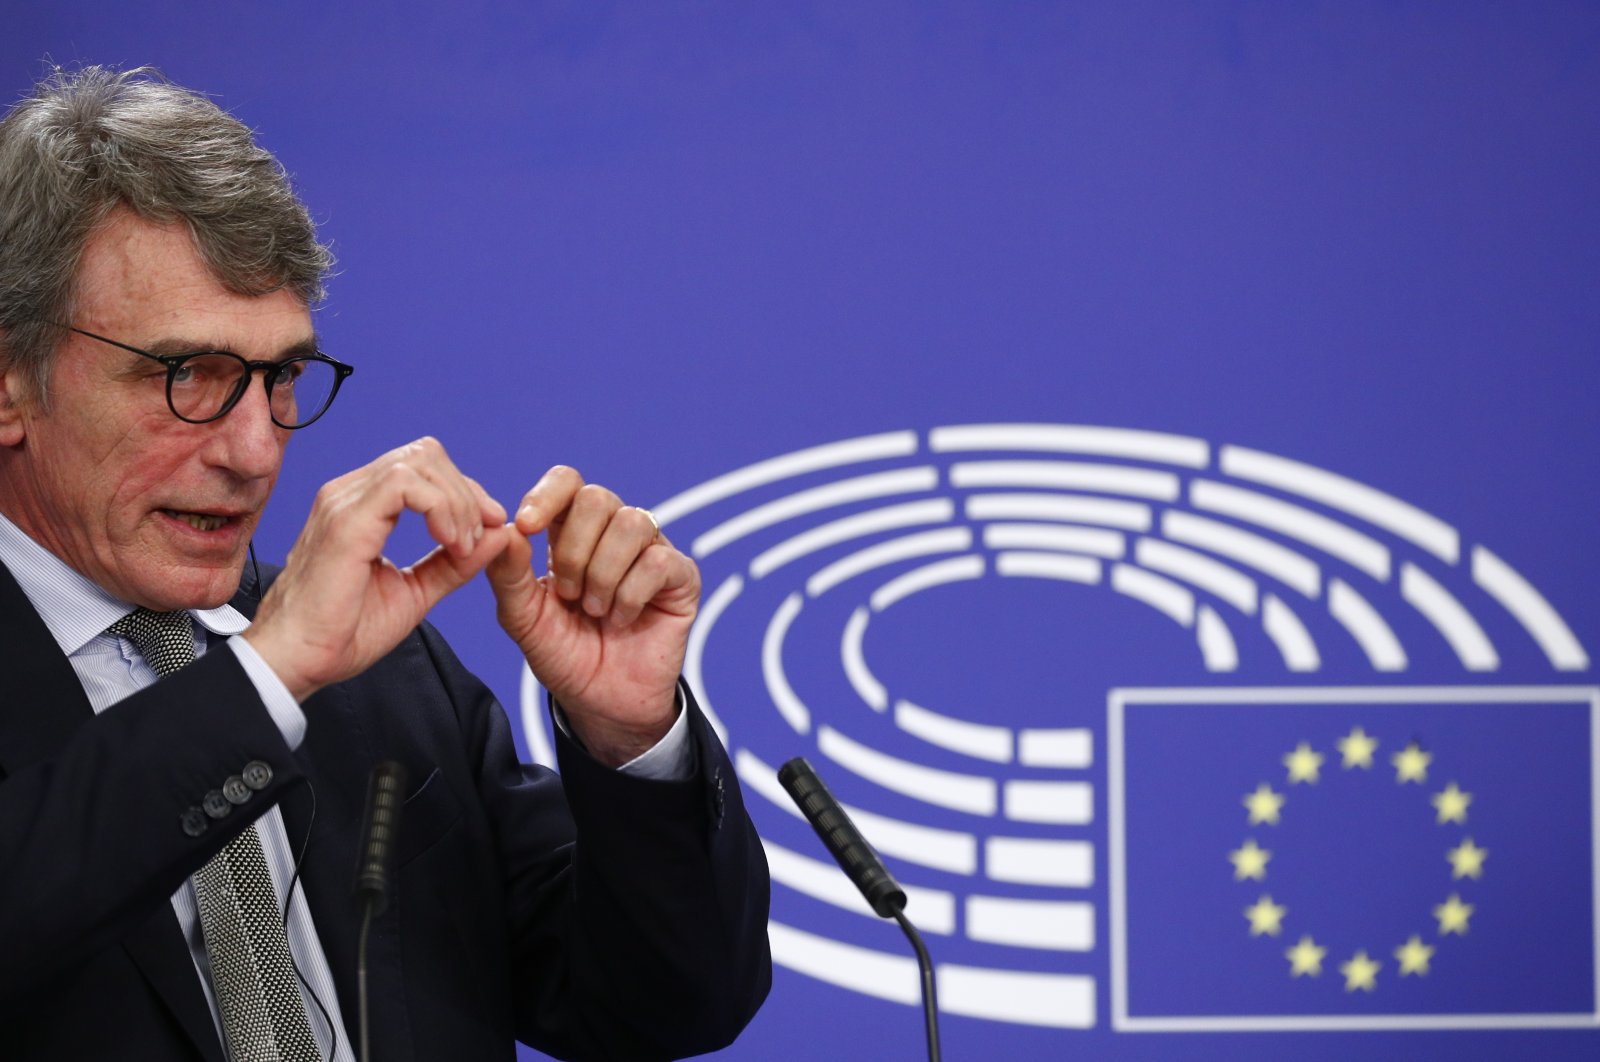 European Parliament President David Sassoli talks during a news conference following the recovery financial plan deal at the EU leaders summit, at the European Parliament in Brussels, Wednesday, July 22, 2020. (AP Photo)